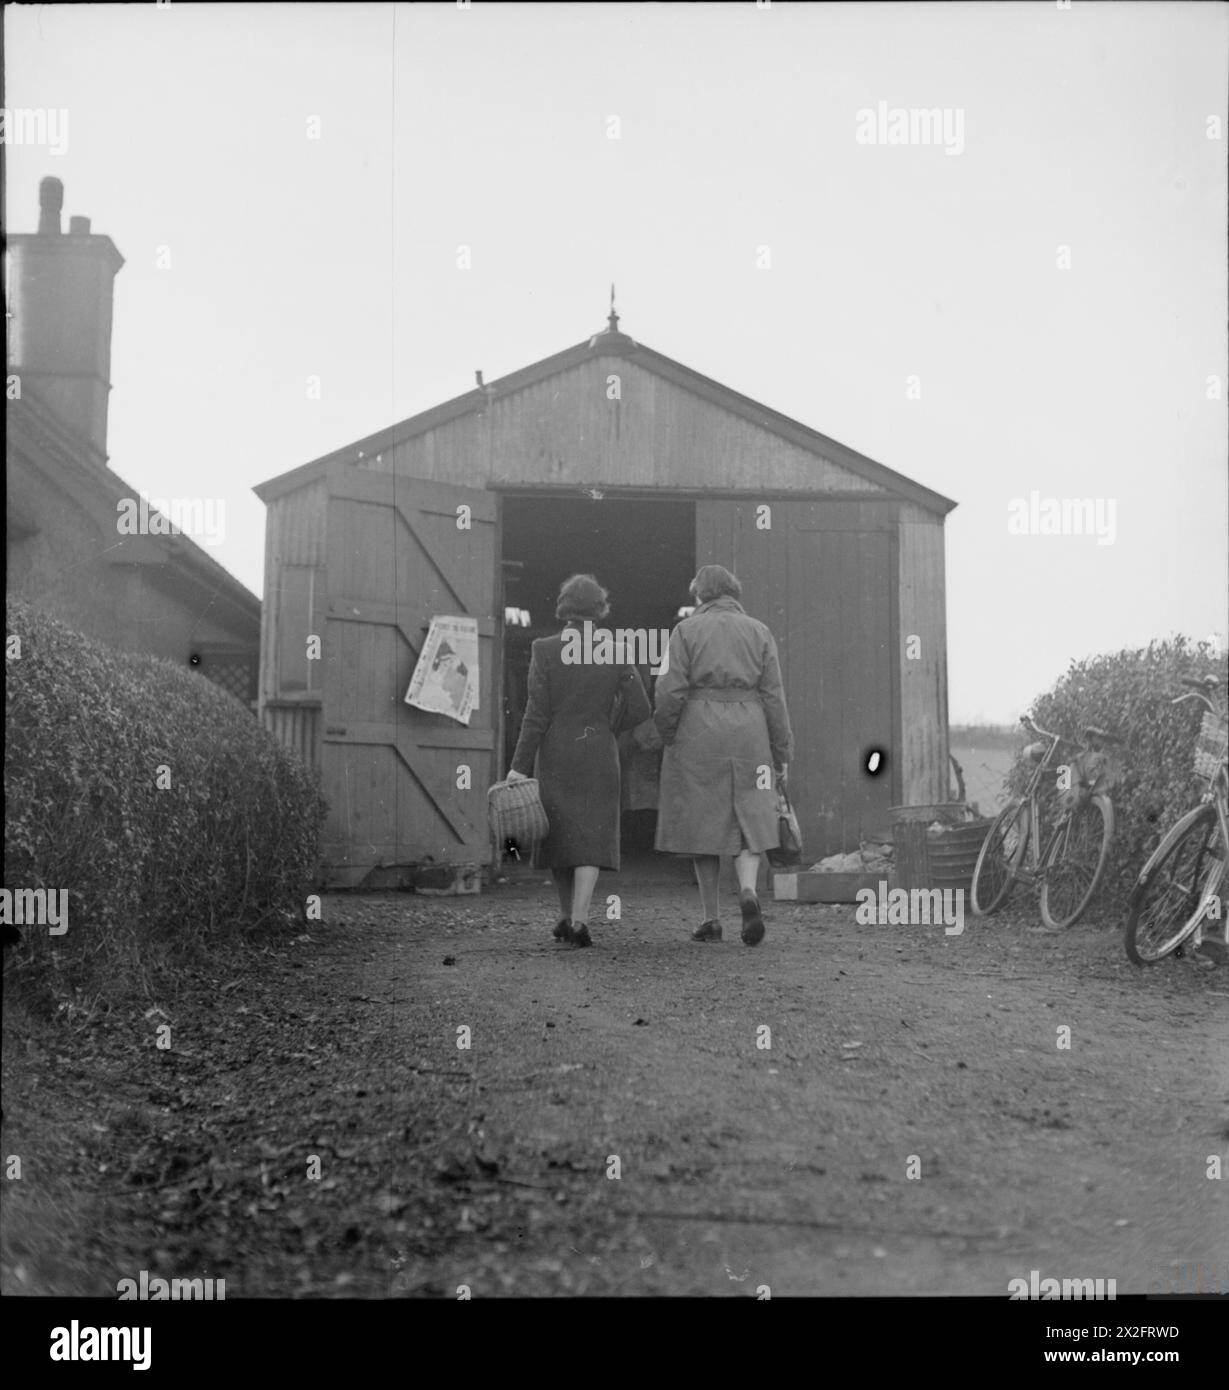 STEN GUN PRODUCTION IN BRITAIN, 1943 - Two part-time war workers enter their 'factory at the beginning of their shift. The building is an old hen house which is being reused as a venue for the manufacture of breech blocks from solid steel bars. This 'factory' was owned by Mr C W (Charles) Packard, an engineer and former haulage contractor, and was probably in Welwyn Garden City Stock Photo